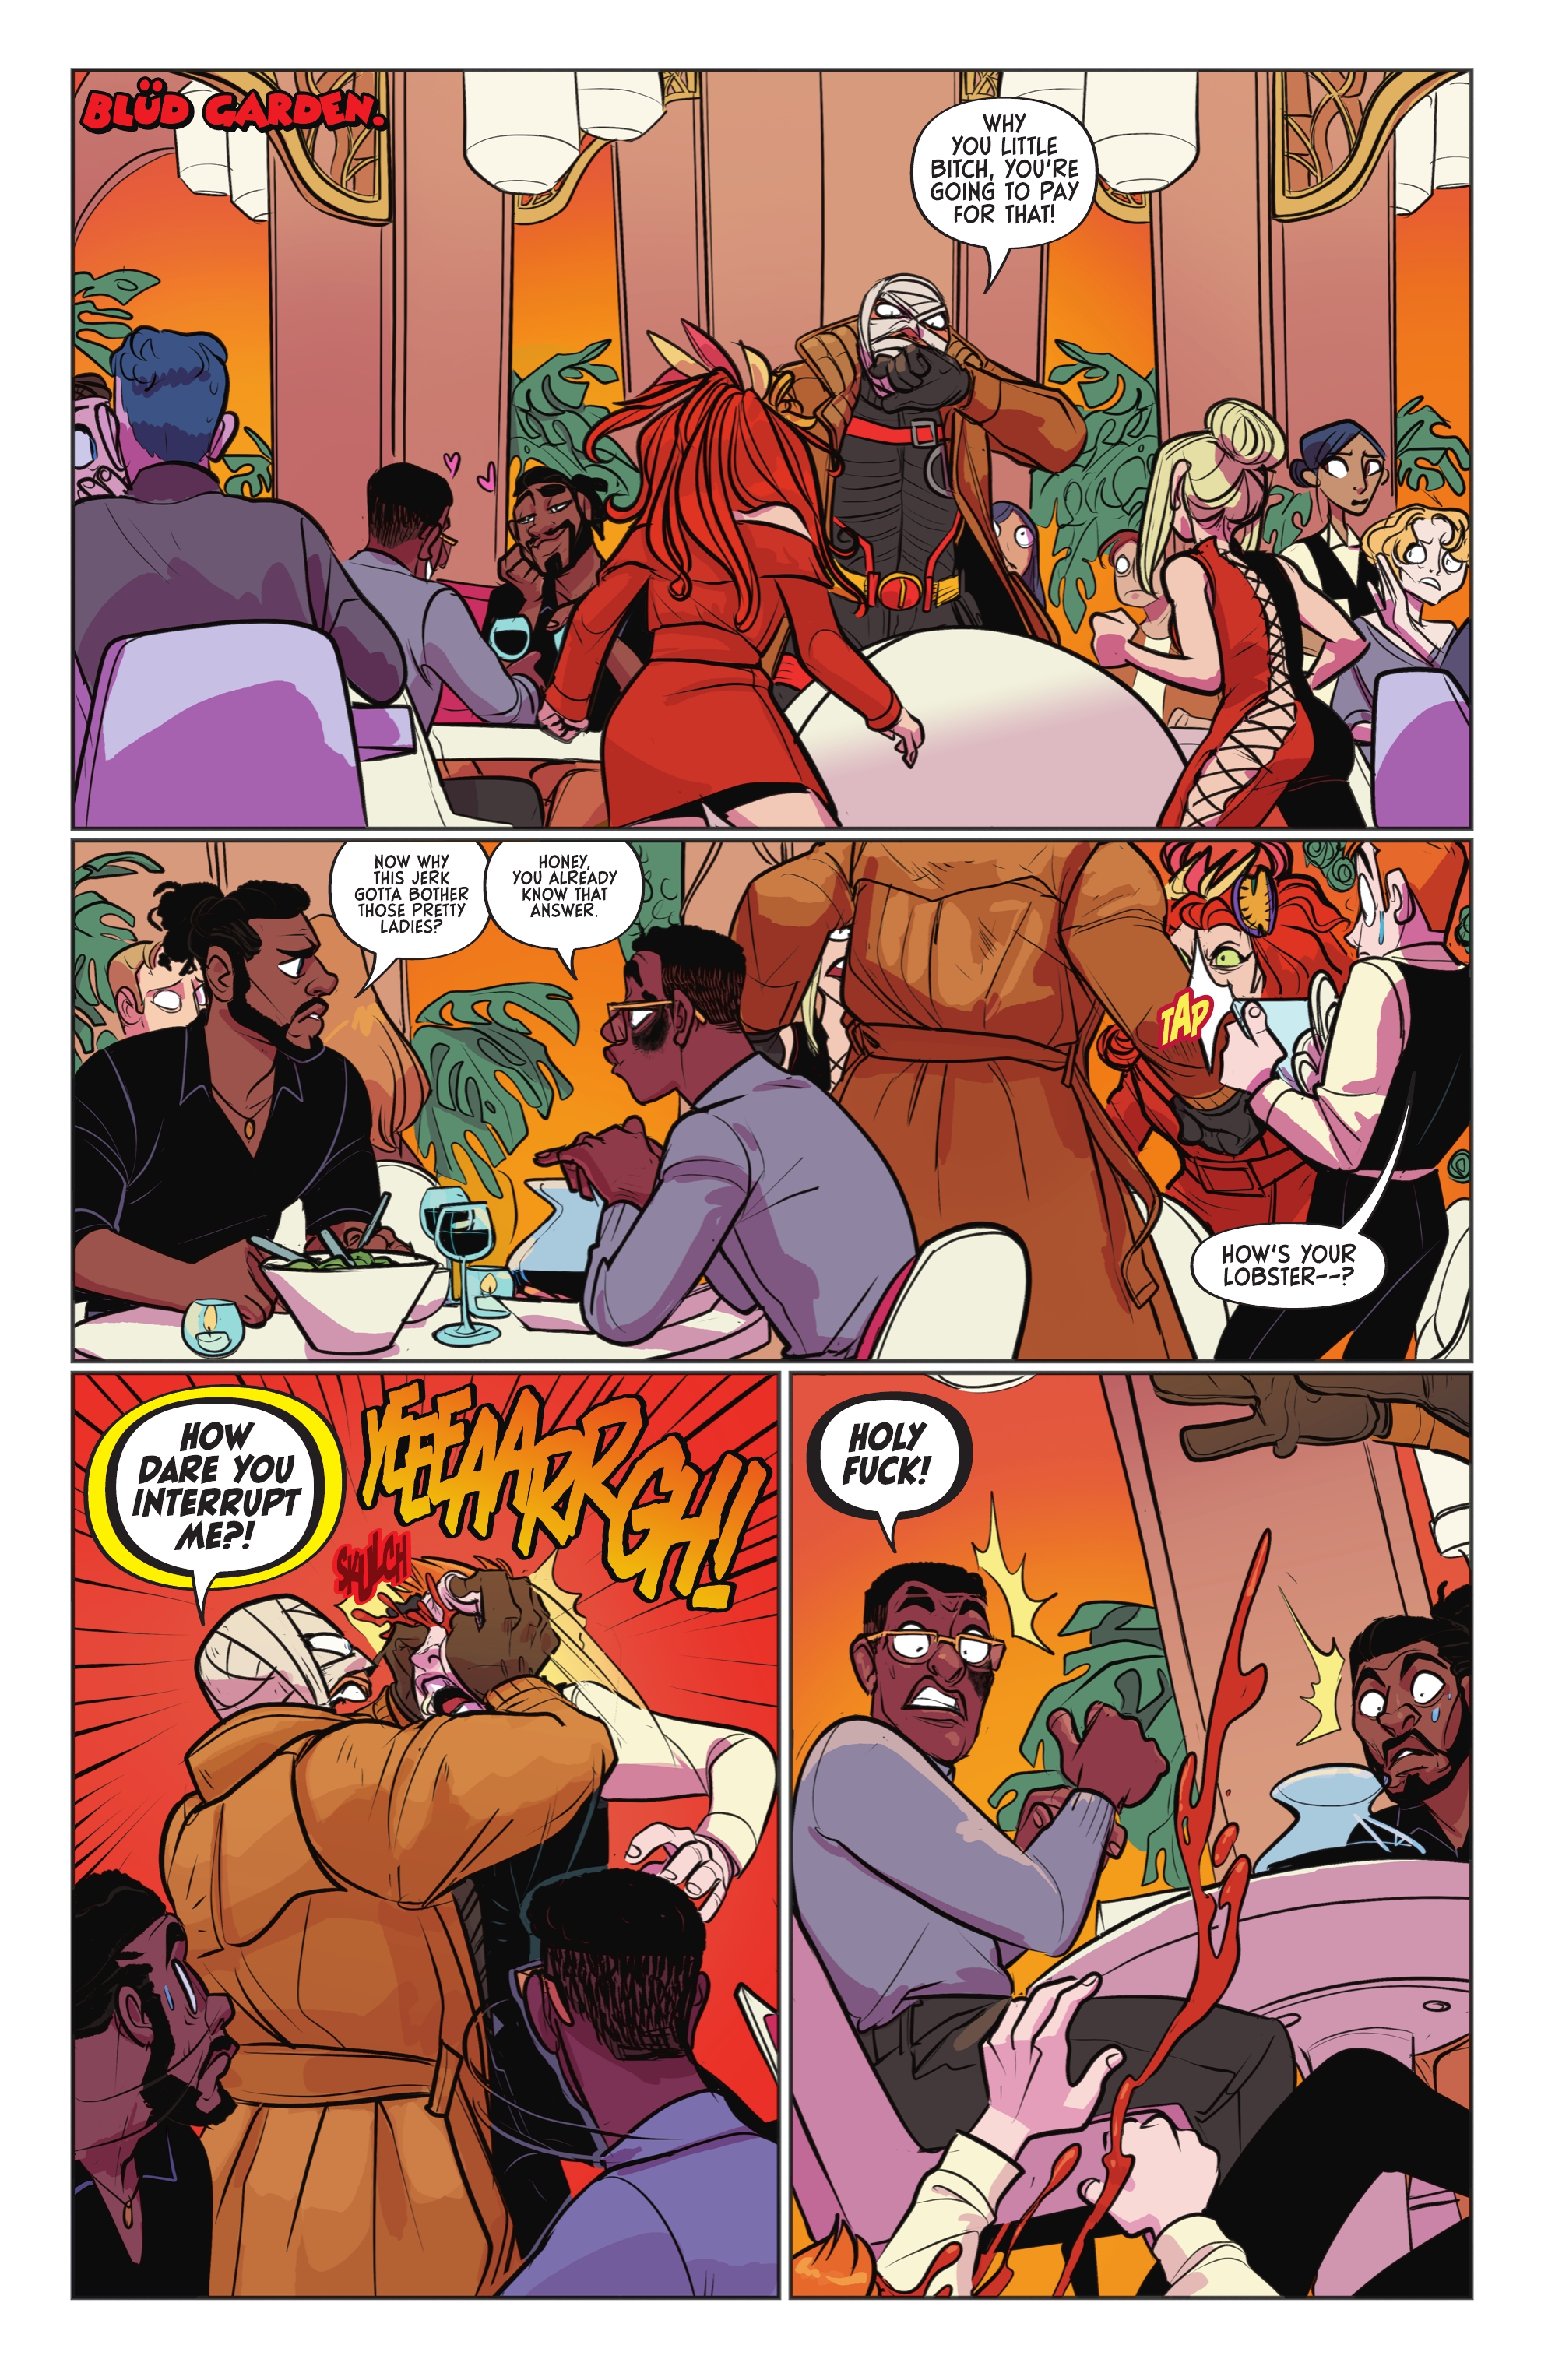 Harley Quinn: The Animated Series: The Eat. Bang! Kill. Tour (2021-): Chapter 3 - Page 3